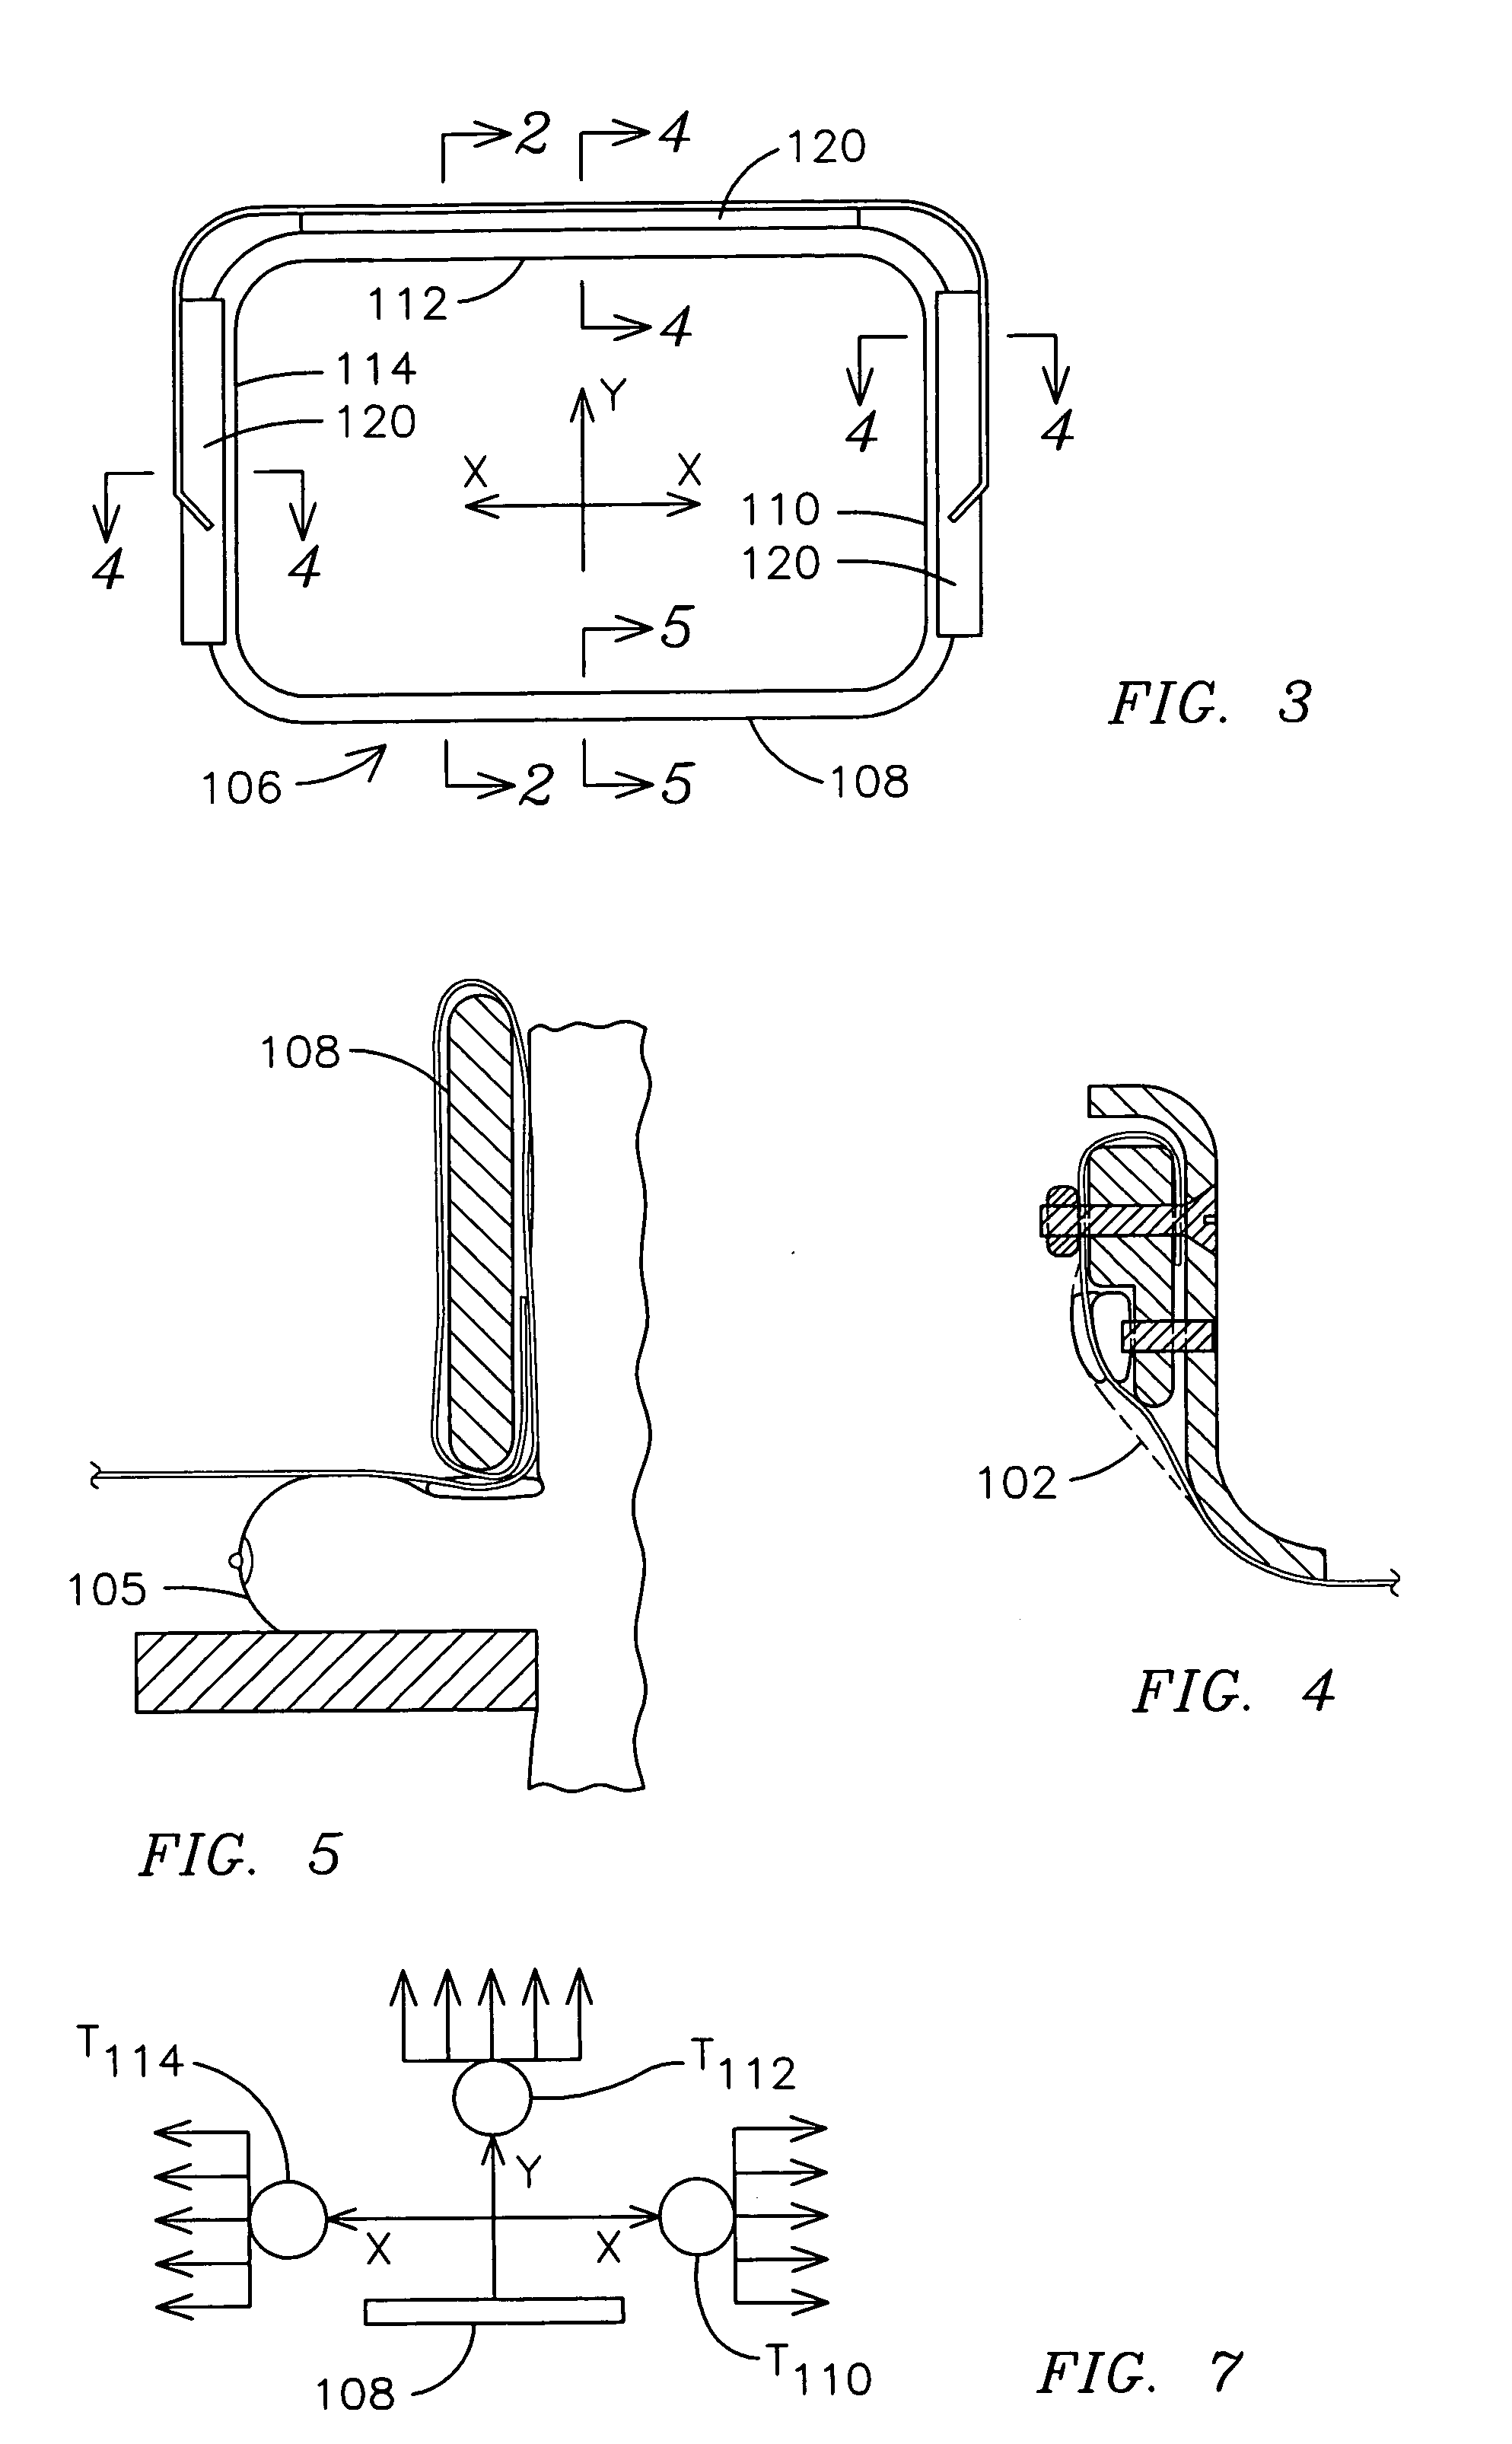 Compression paddle membrane and tensioning apparatus for compressing tissue for medical imaging purposes